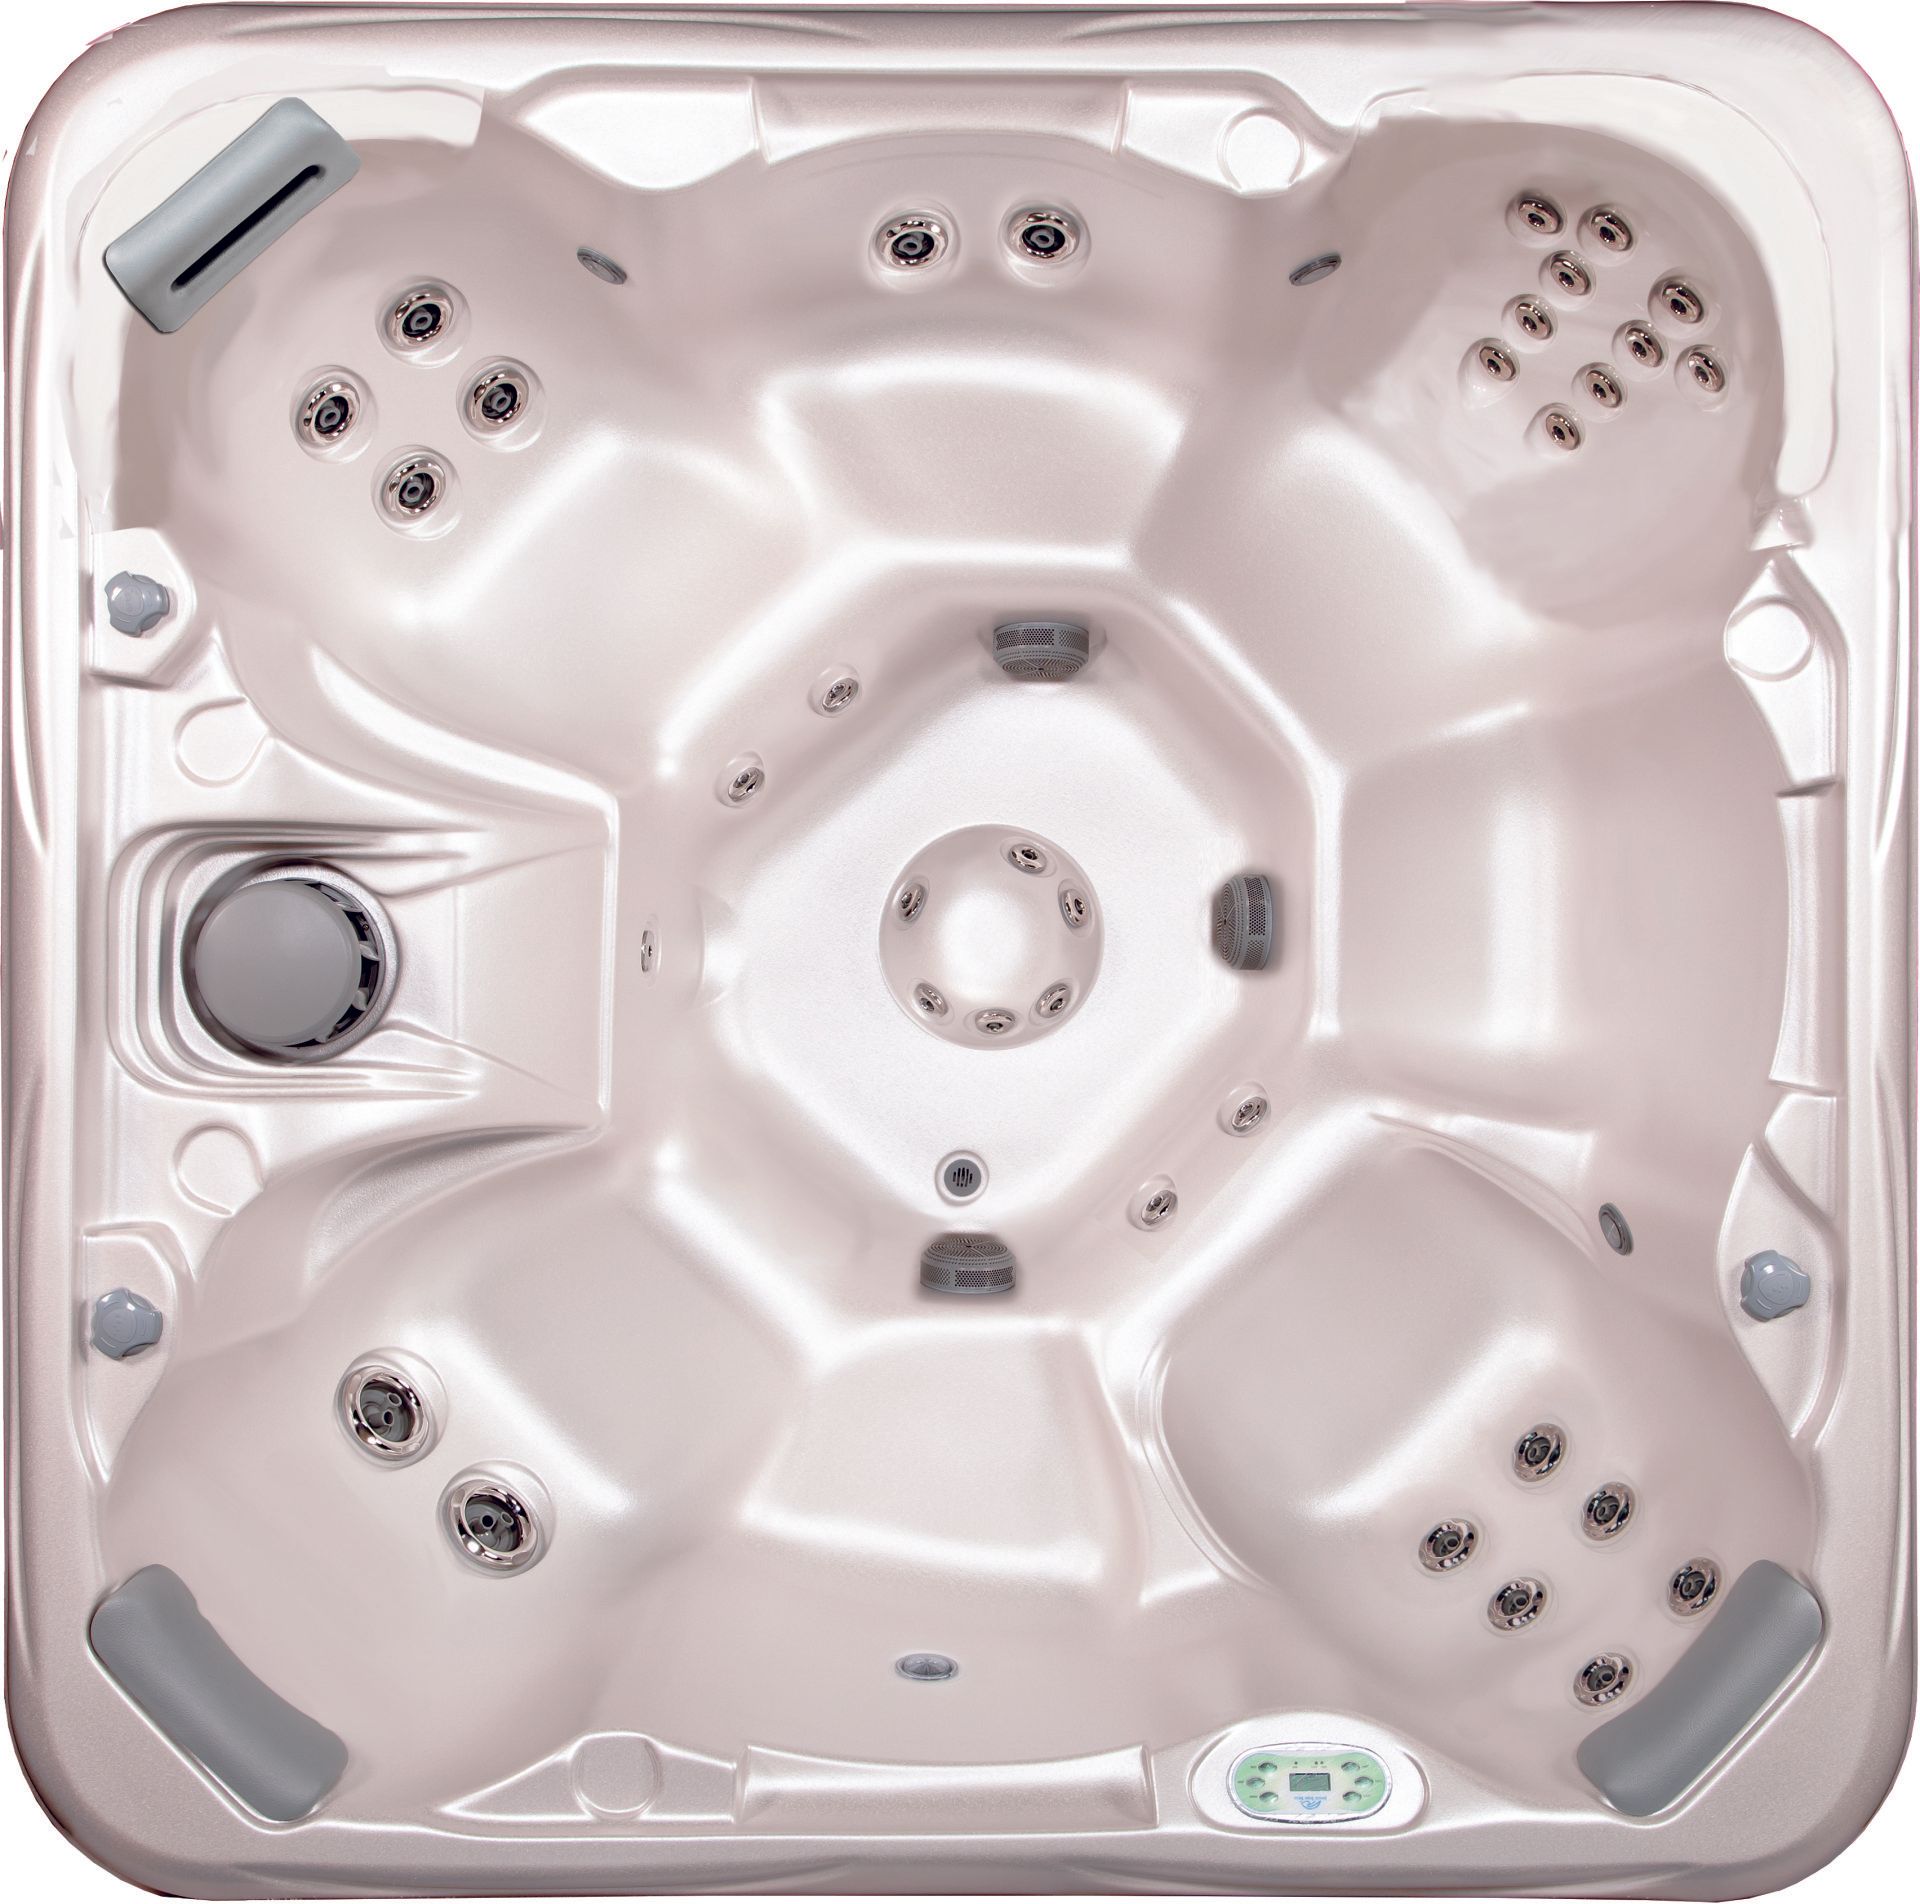 The 735L Special Edition best hot tub